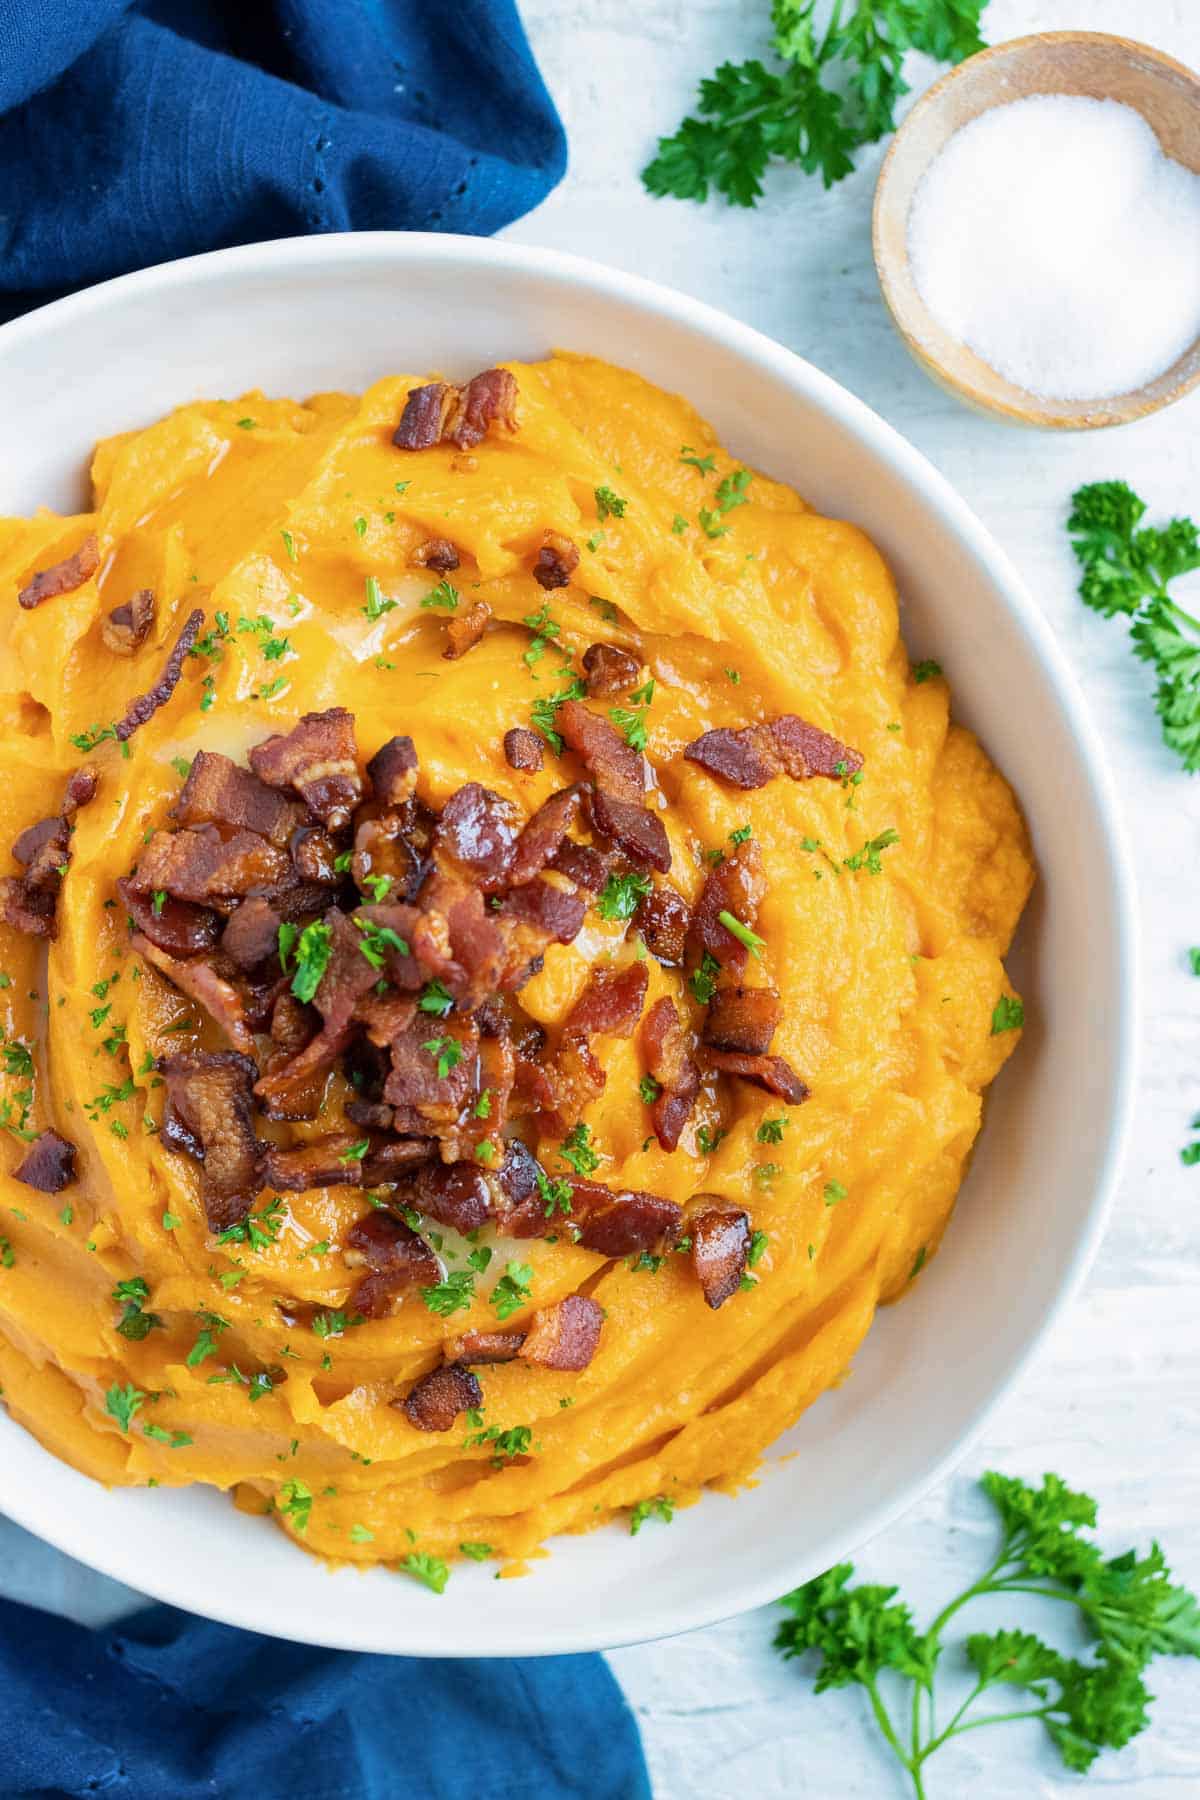 Paleo and heathy sweet potato mash recipe with bacon and maple syrup.